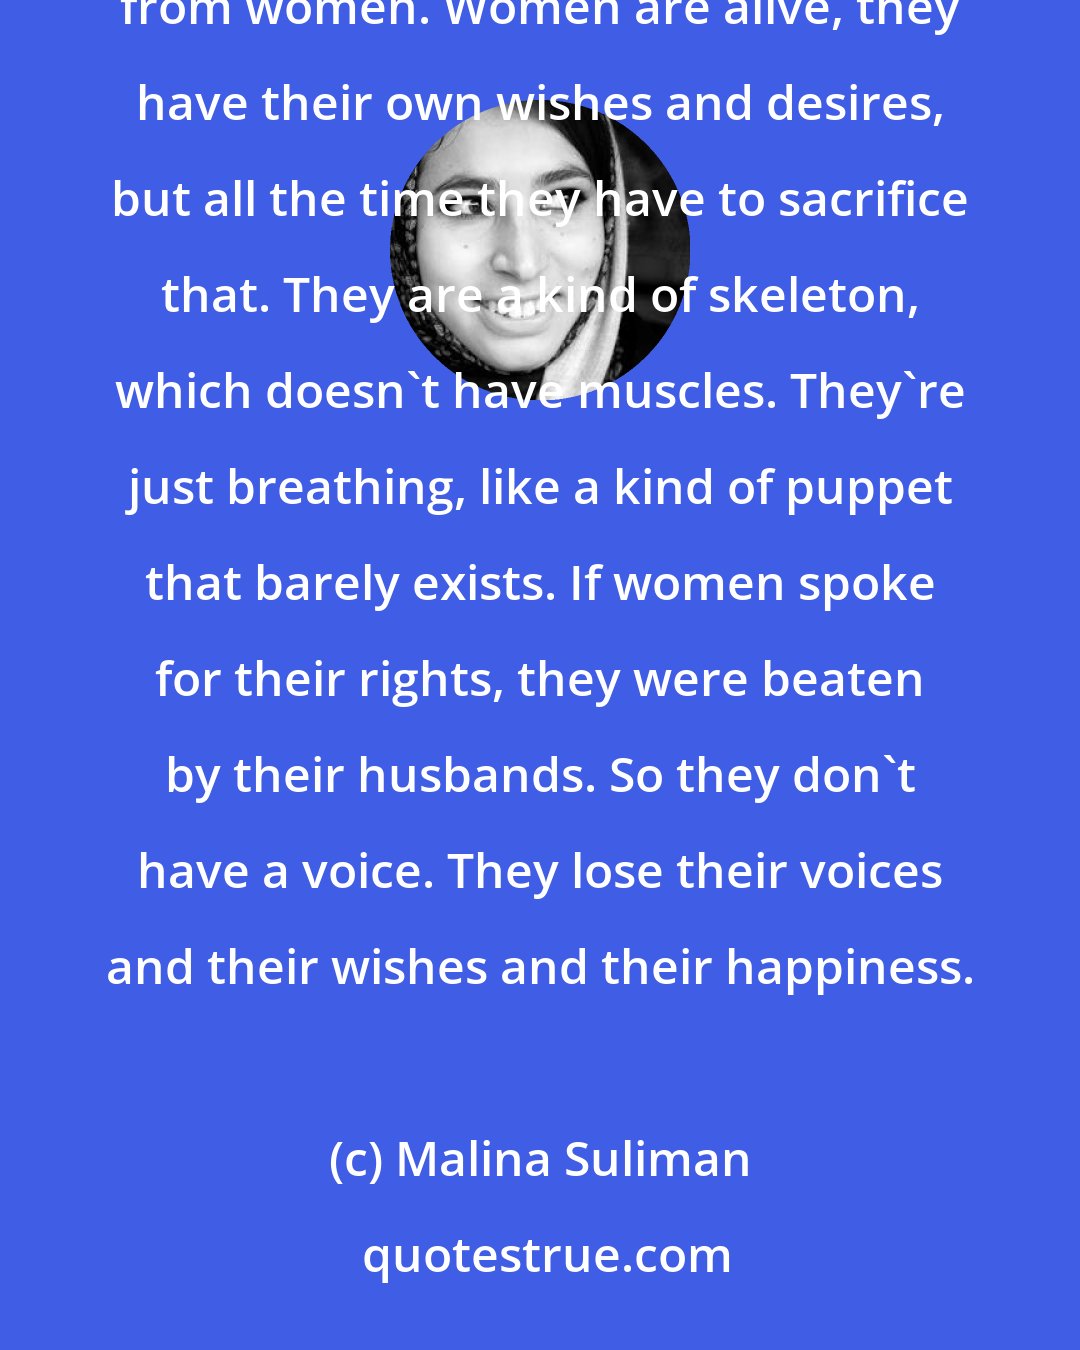 Malina Suliman: I have always used the burqa because men are using the burqa in the name of culture and religion to take freedom from women. Women are alive, they have their own wishes and desires, but all the time they have to sacrifice that. They are a kind of skeleton, which doesn't have muscles. They're just breathing, like a kind of puppet that barely exists. If women spoke for their rights, they were beaten by their husbands. So they don't have a voice. They lose their voices and their wishes and their happiness.